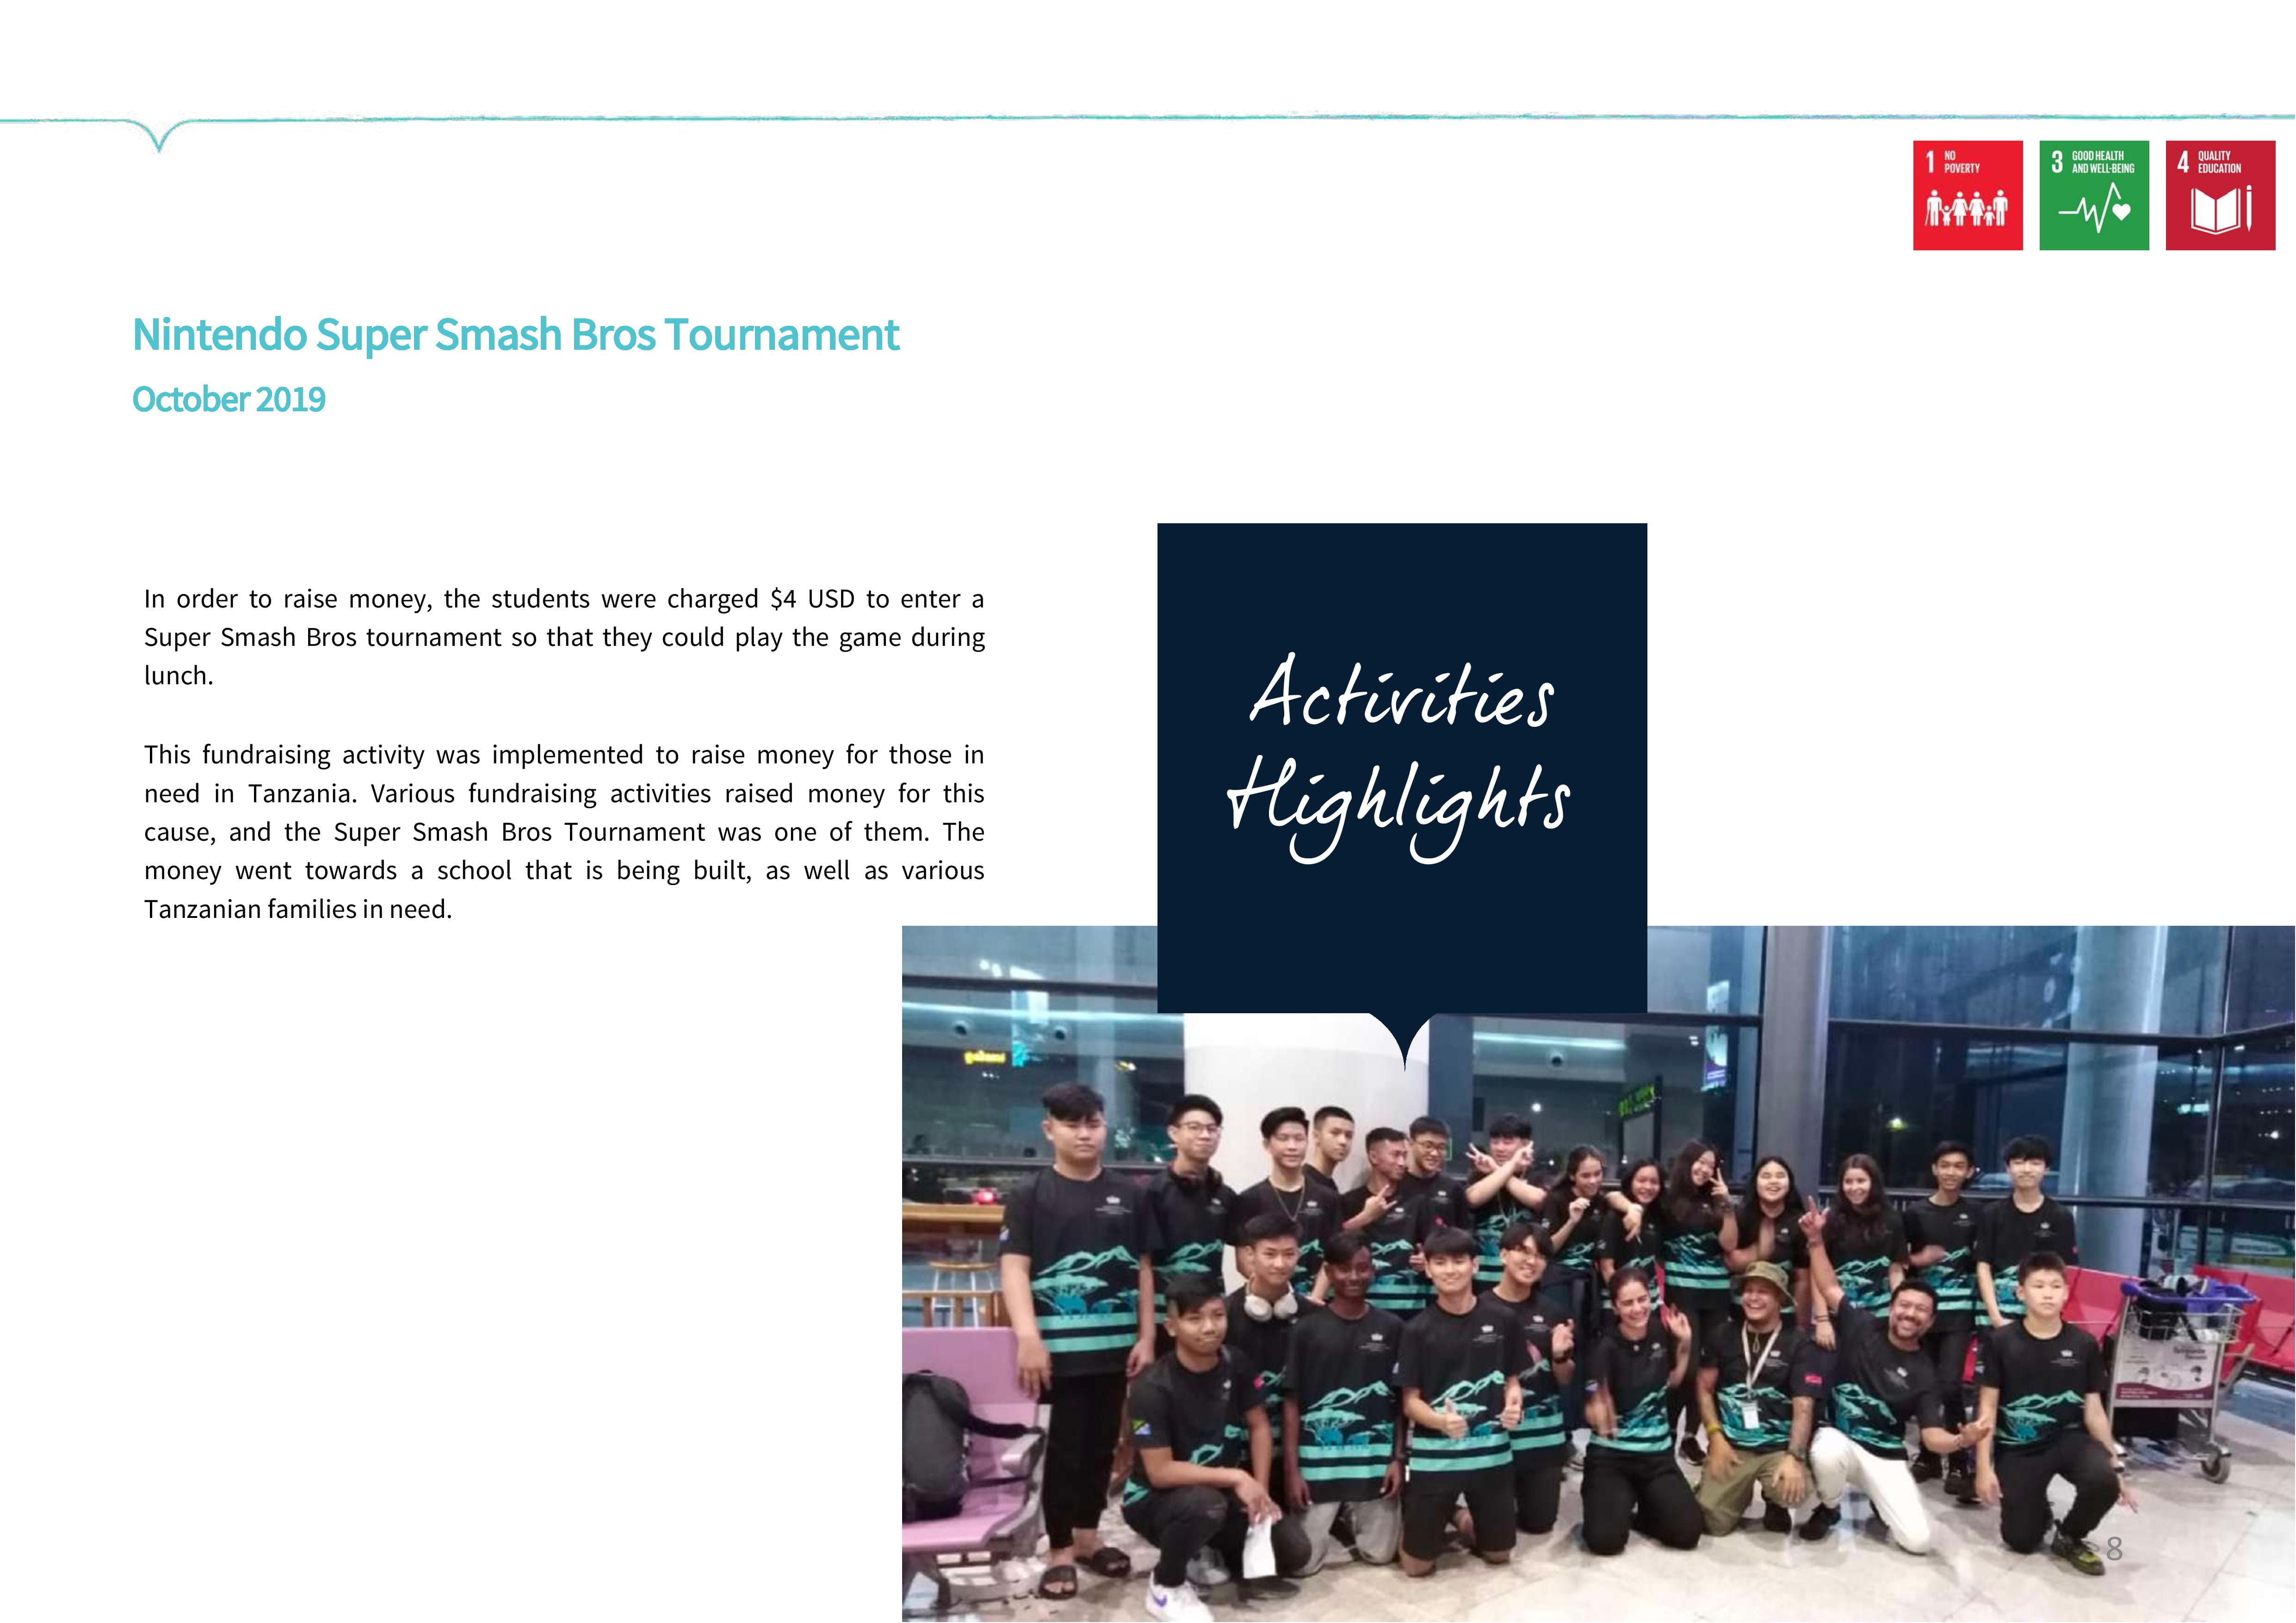 Share A Dream platform launched at Northbridge for social outreach activities-share-a-dream-platform-launched-at-northbridge-for-social-outreach-activities-NISC report term 1 20192020page008